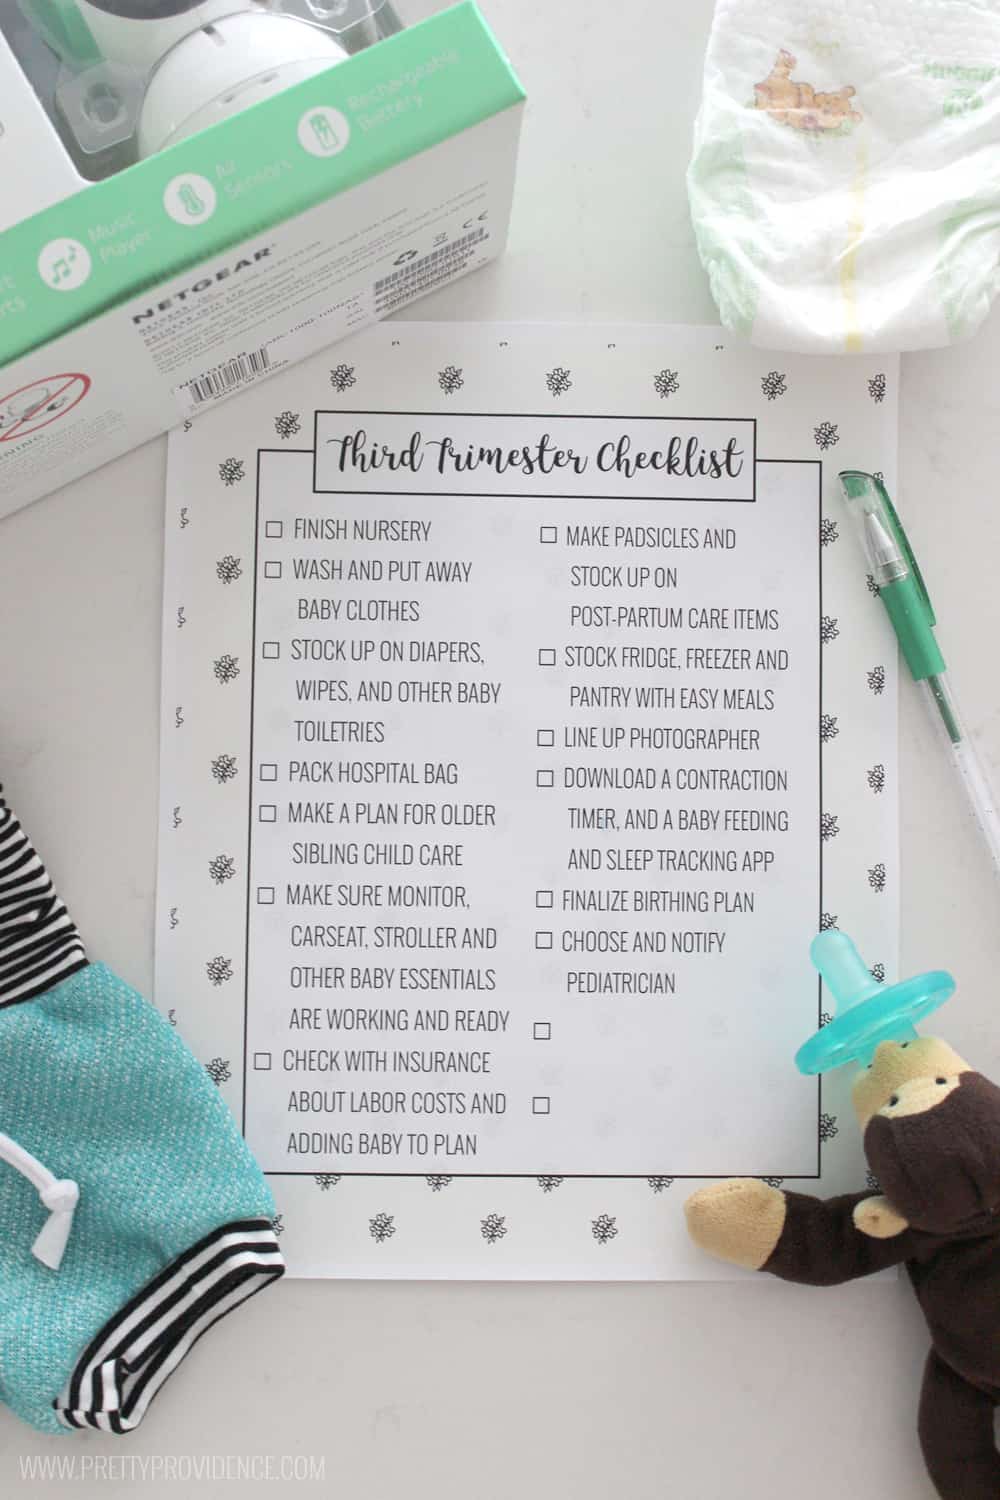 I am loving this third trimester checklist! Leaves off unnecessary items and strips things down to the most essential! A must use! 